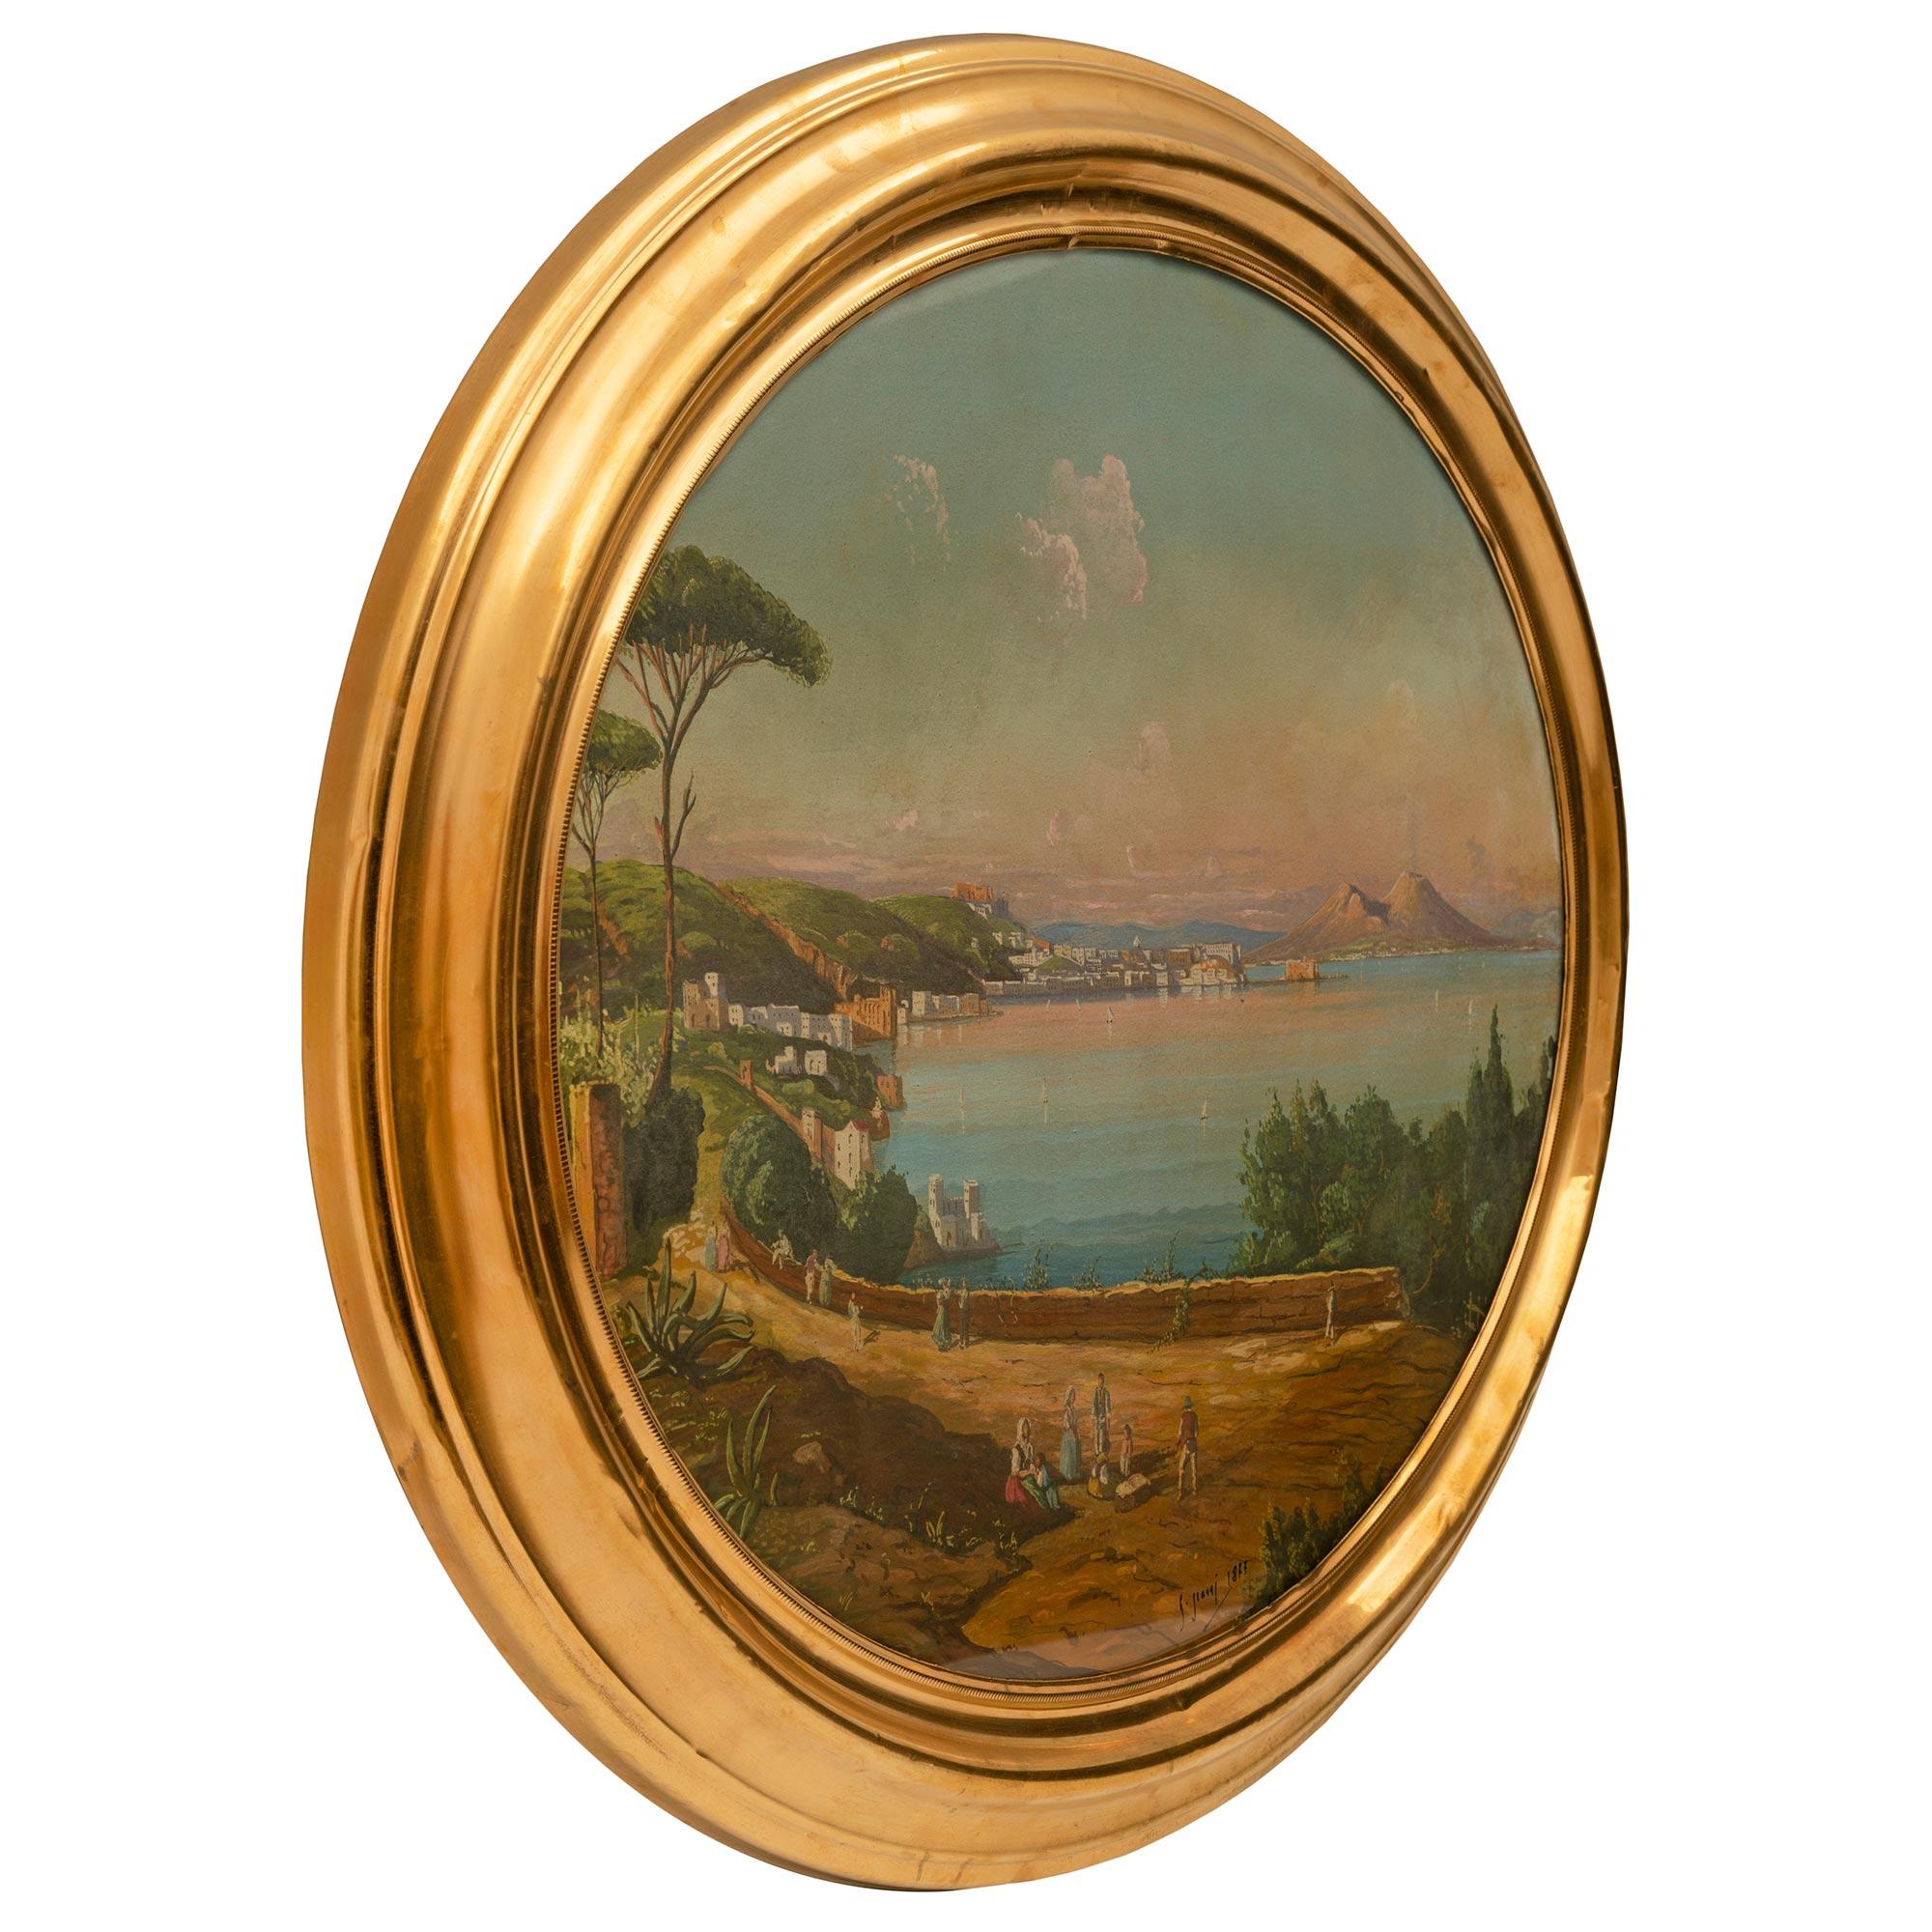 A beautiful Italian 19th century gouache set in its original ormolu frame. The lovely oblong painting depicts the beautiful bay of Naples on a gorgeous day with mount Vesuvius in the background and lovely sail boats and charming personages in the